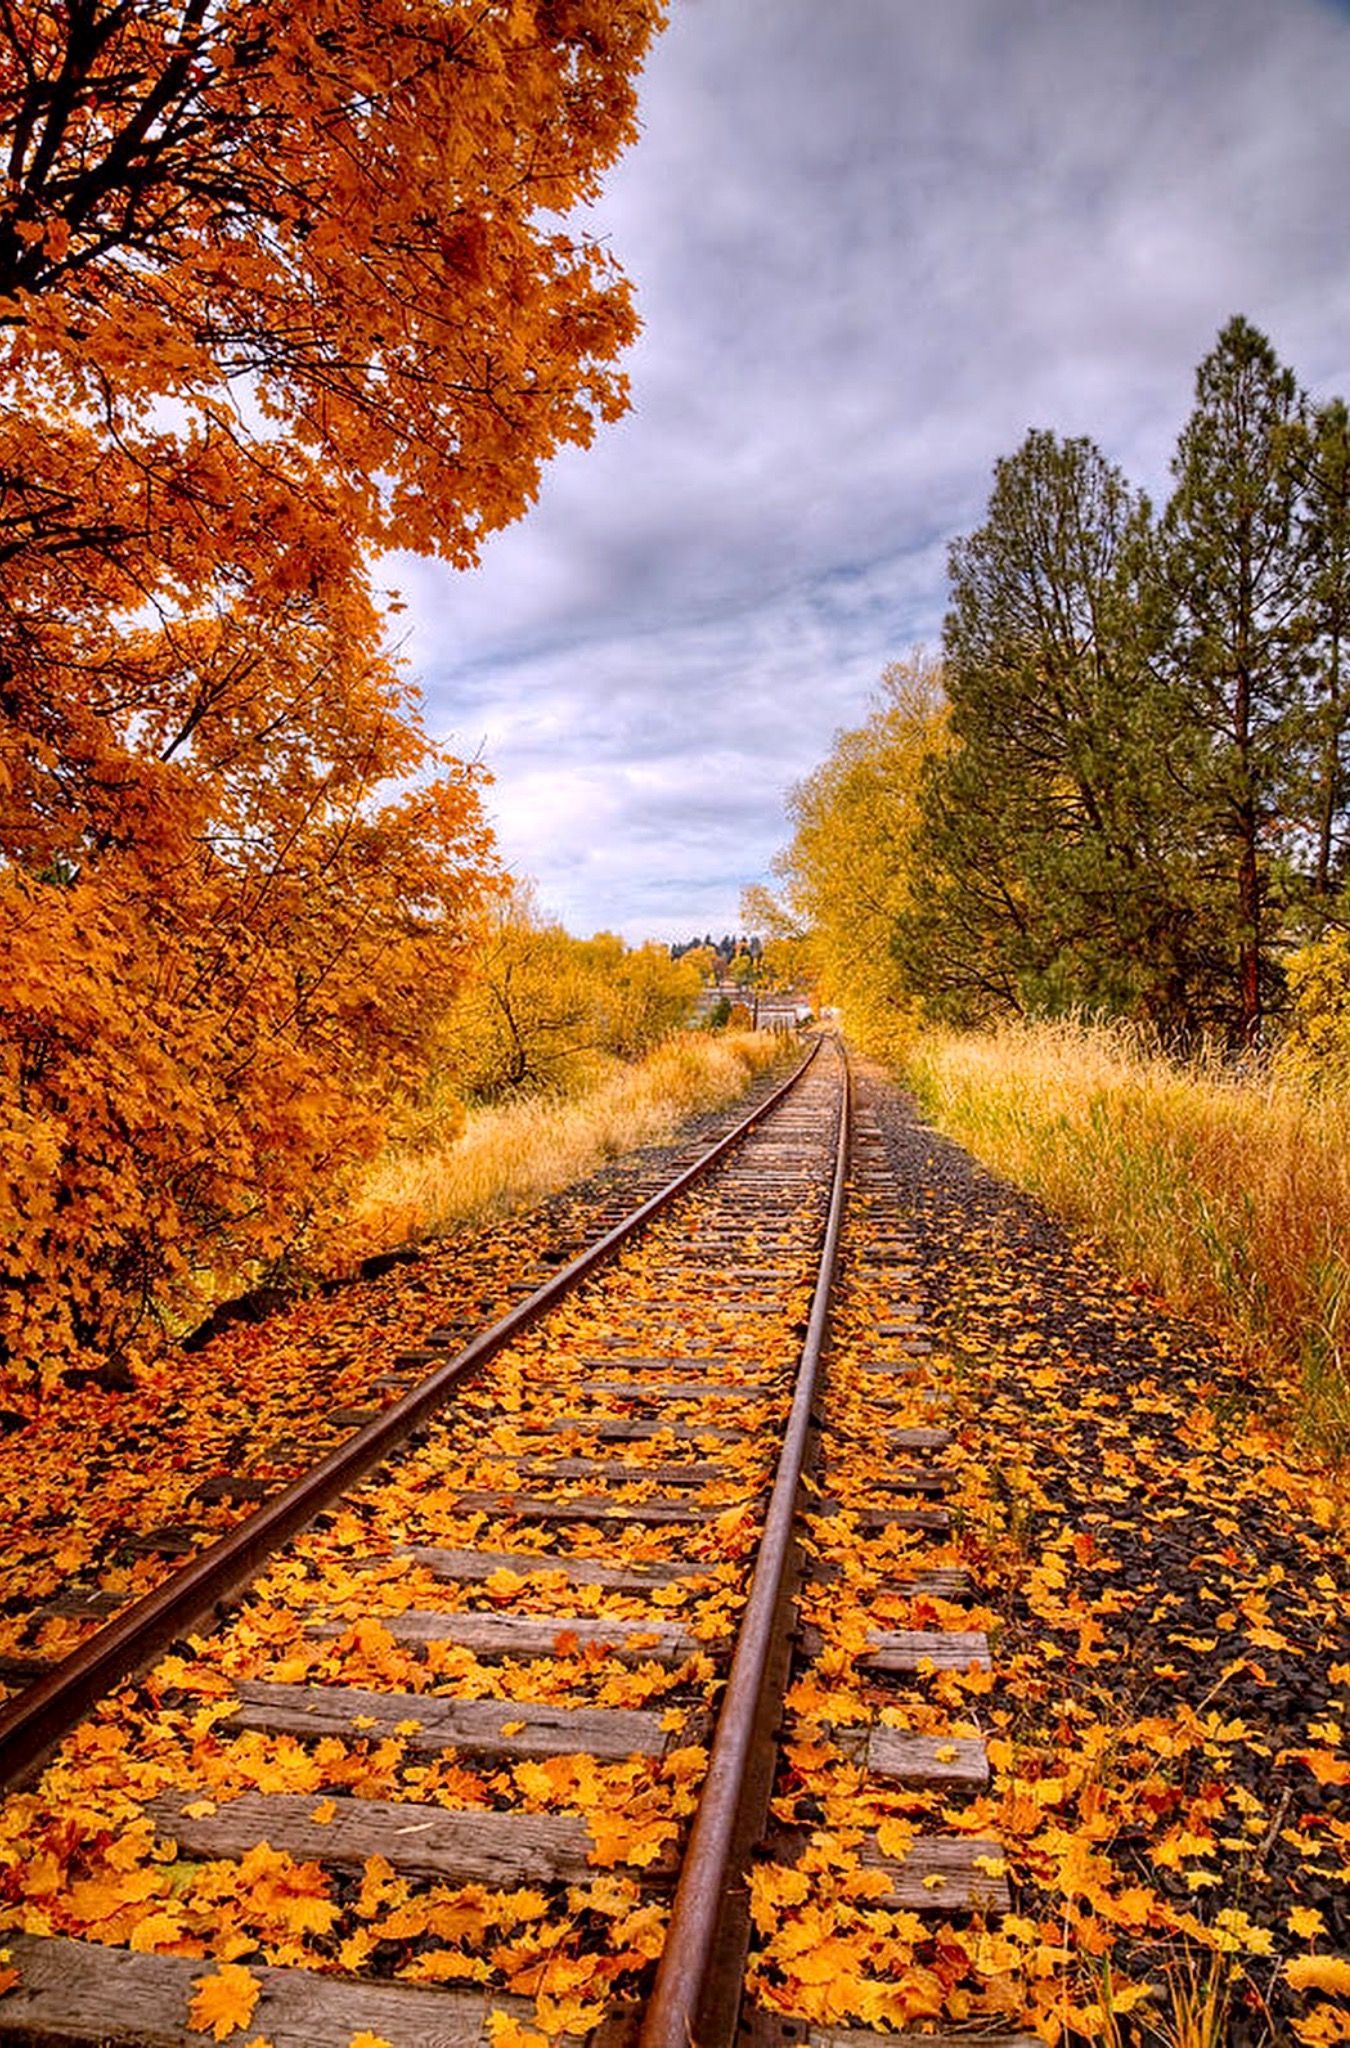 Autumn color on the railroad tracks. Located in downtown Pullman, Washington. Photo by David Patterson. Source. Autumn scenery, Railroad tracks, Scenic railroads